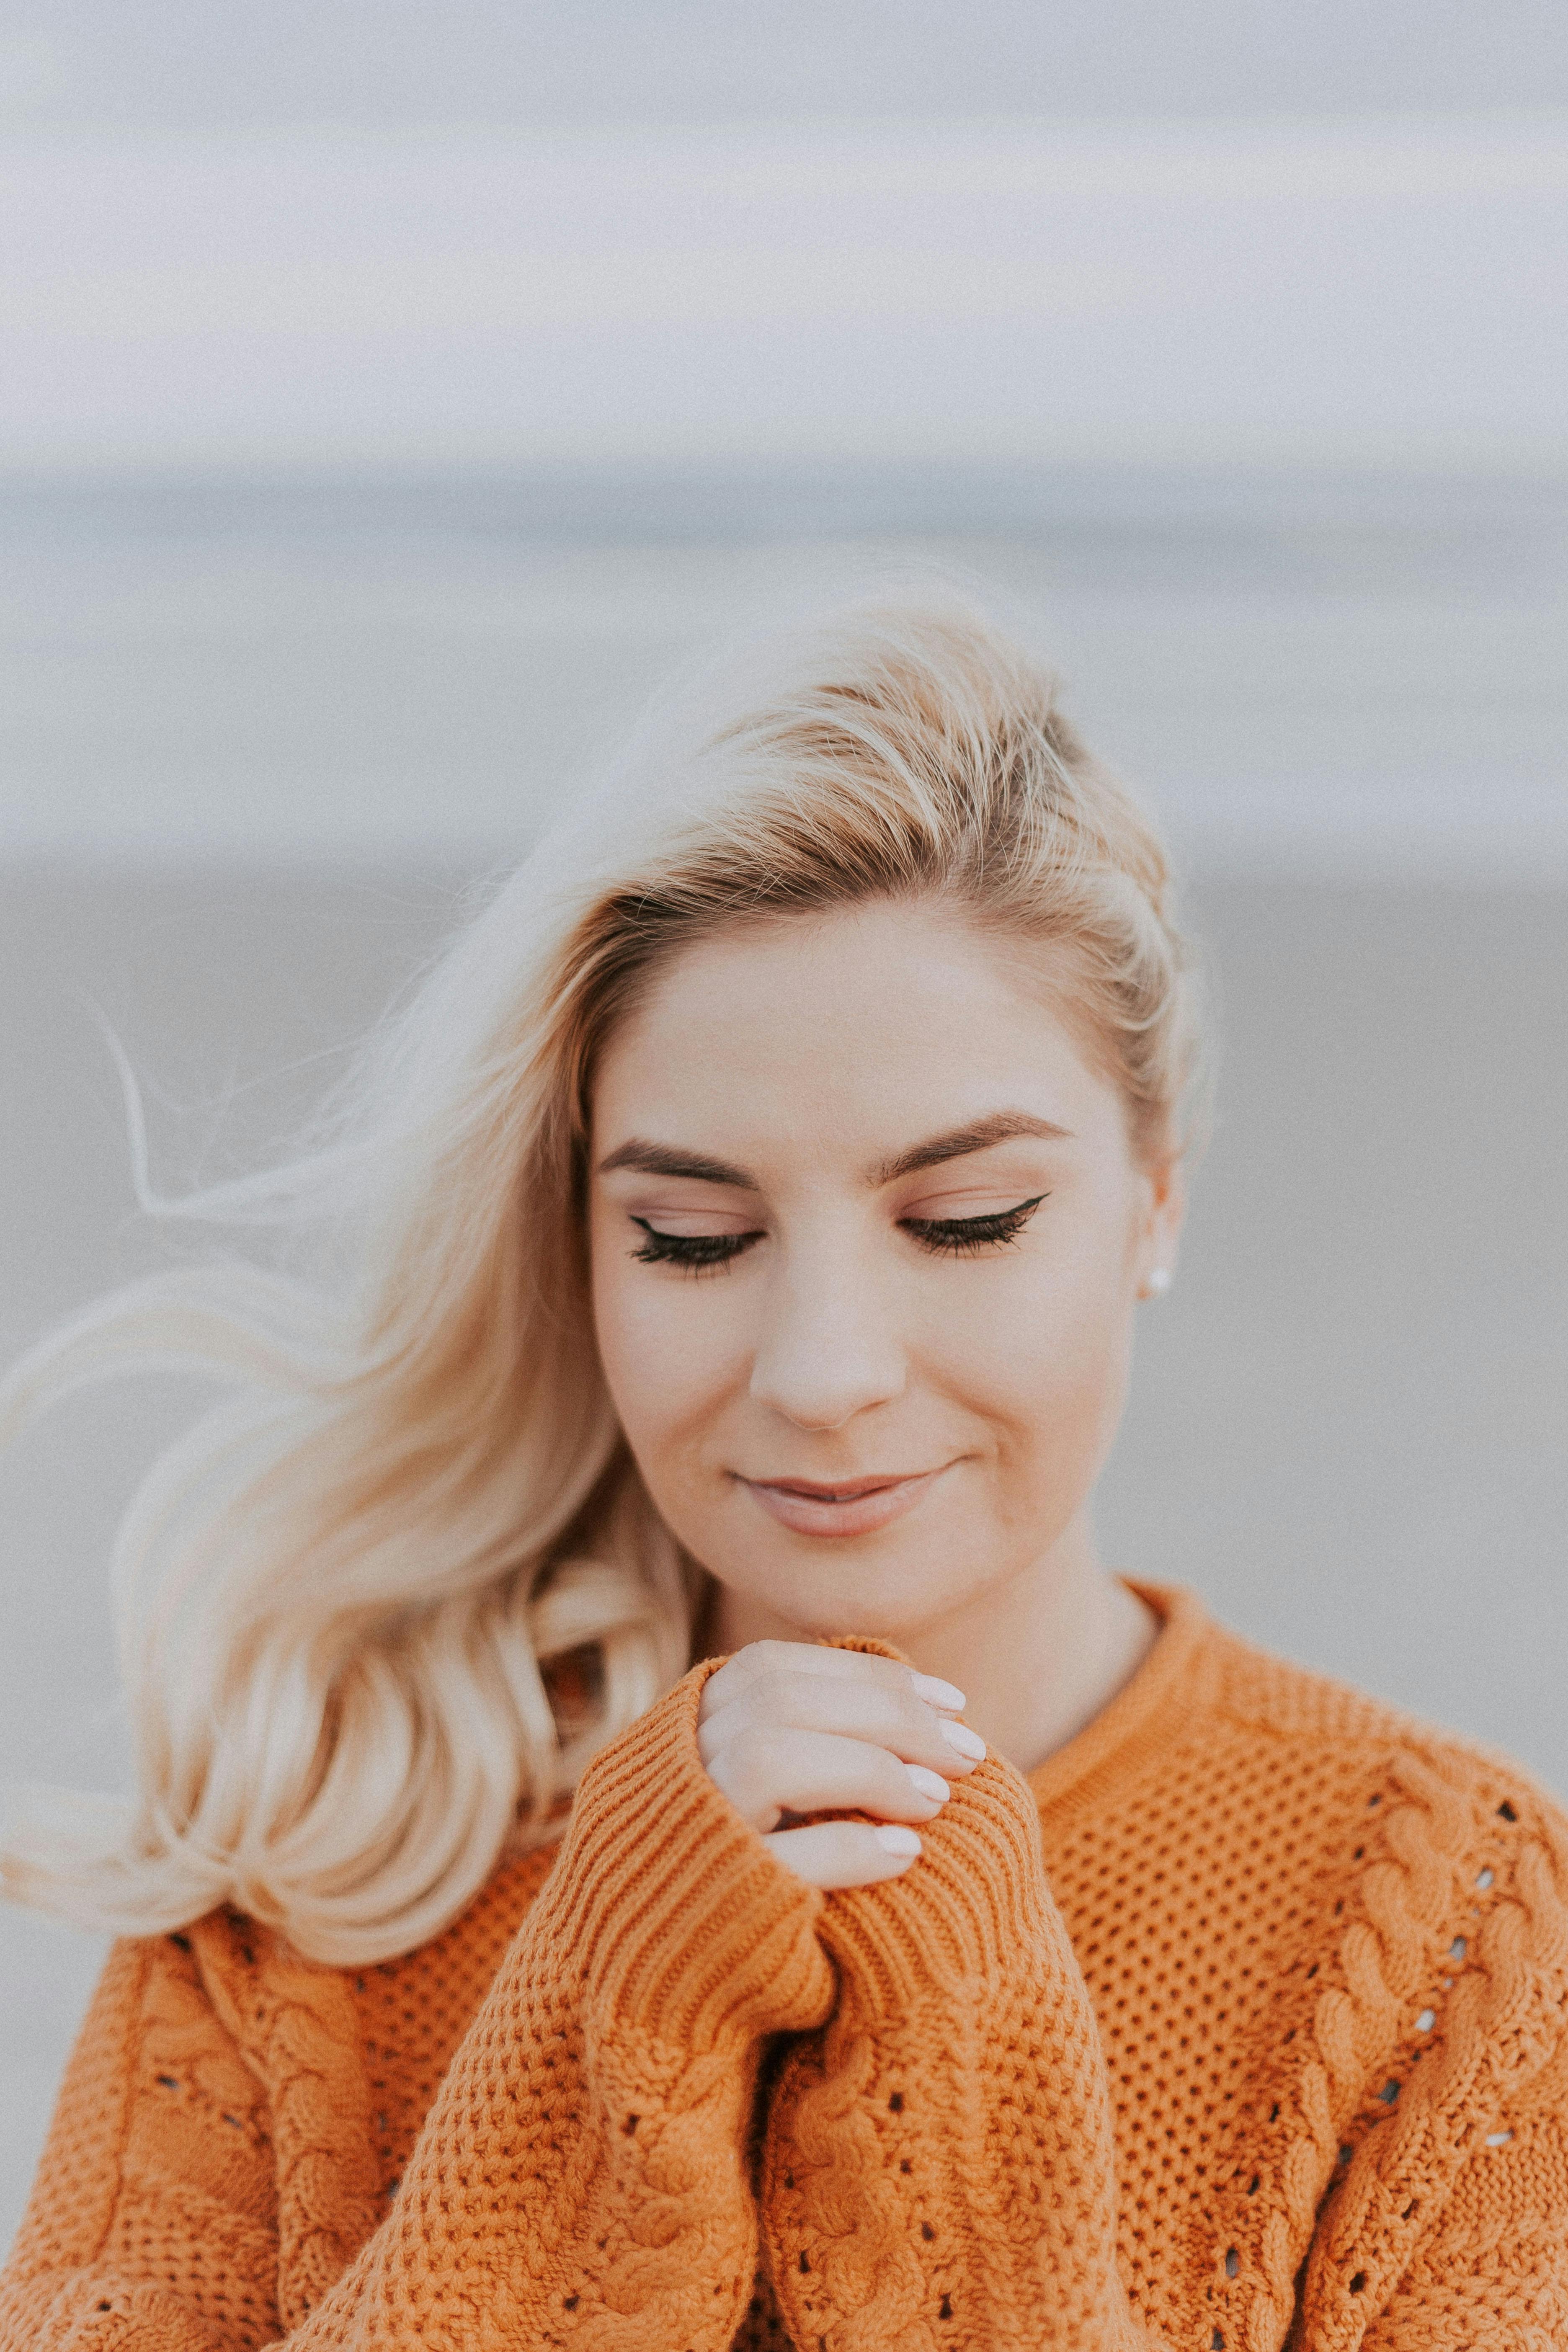 Blonde Haired Woman in Orange Knitted Long-sleeved Top | Source: Pexels